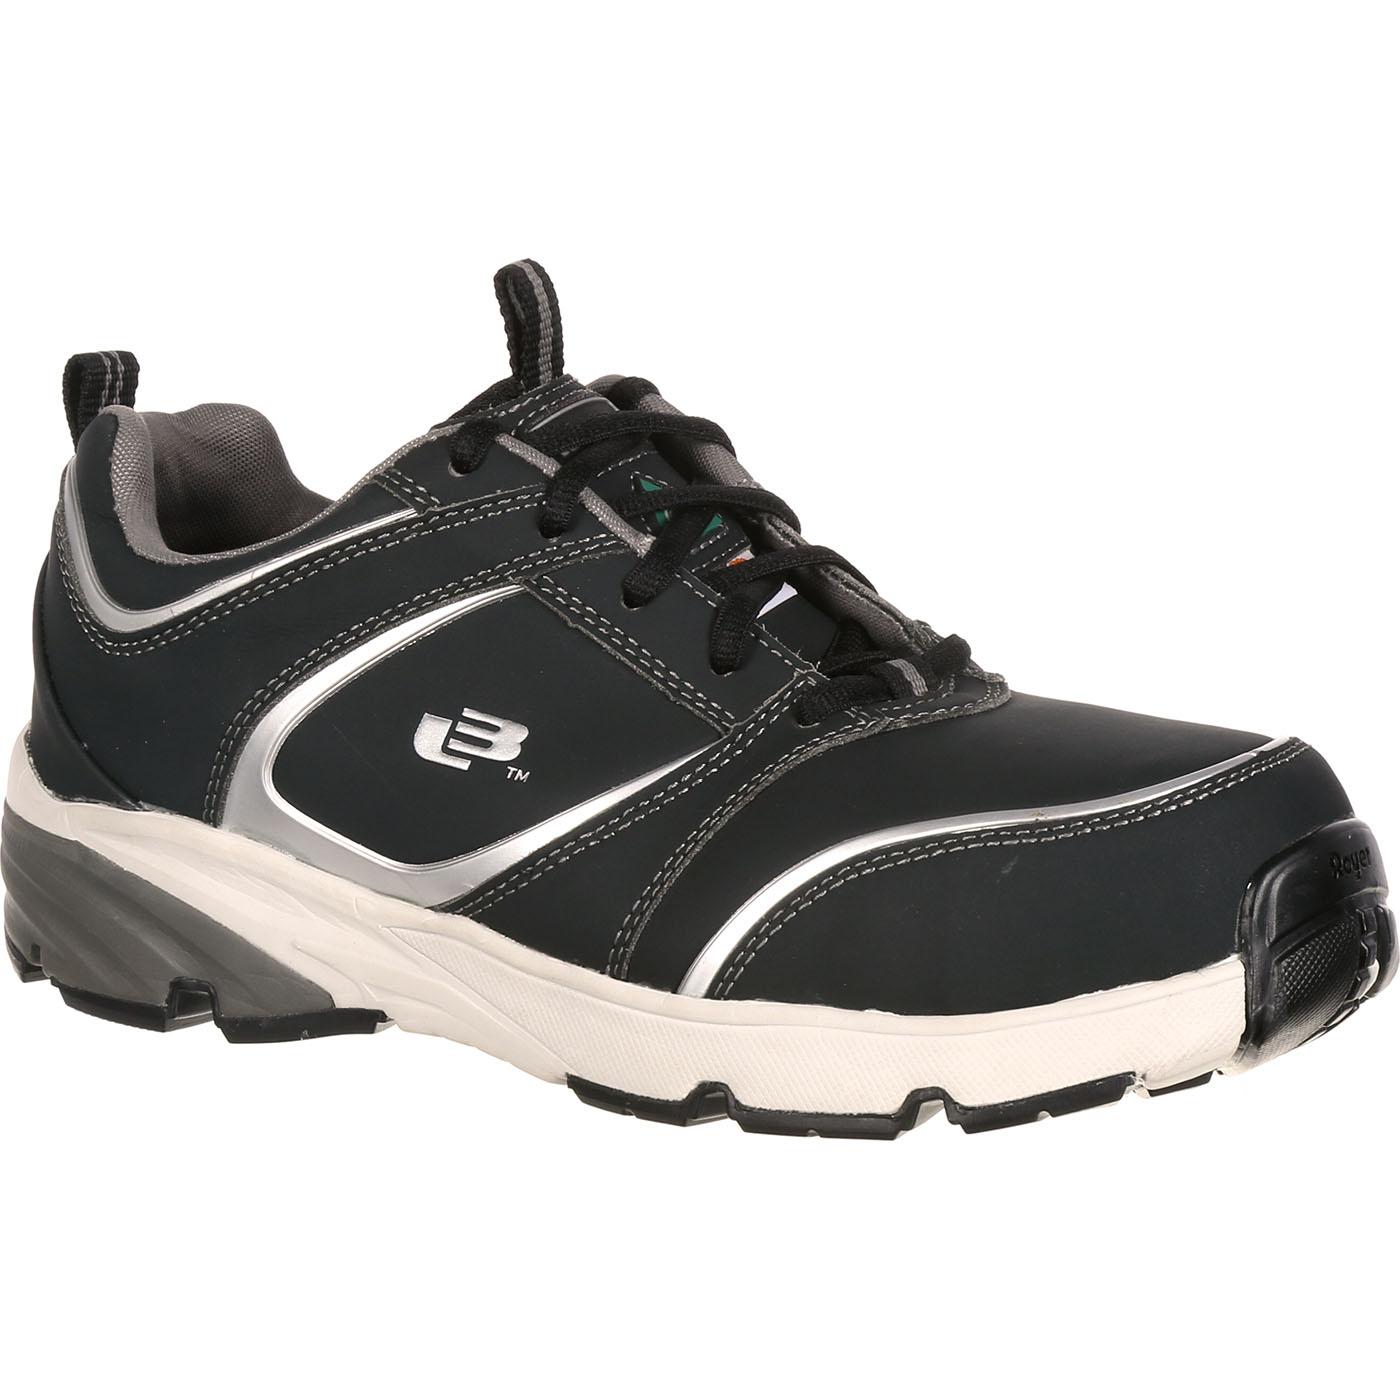 Royer Composite Toe CSA-Approved PR LoCut Work Shoe, #ROY109201